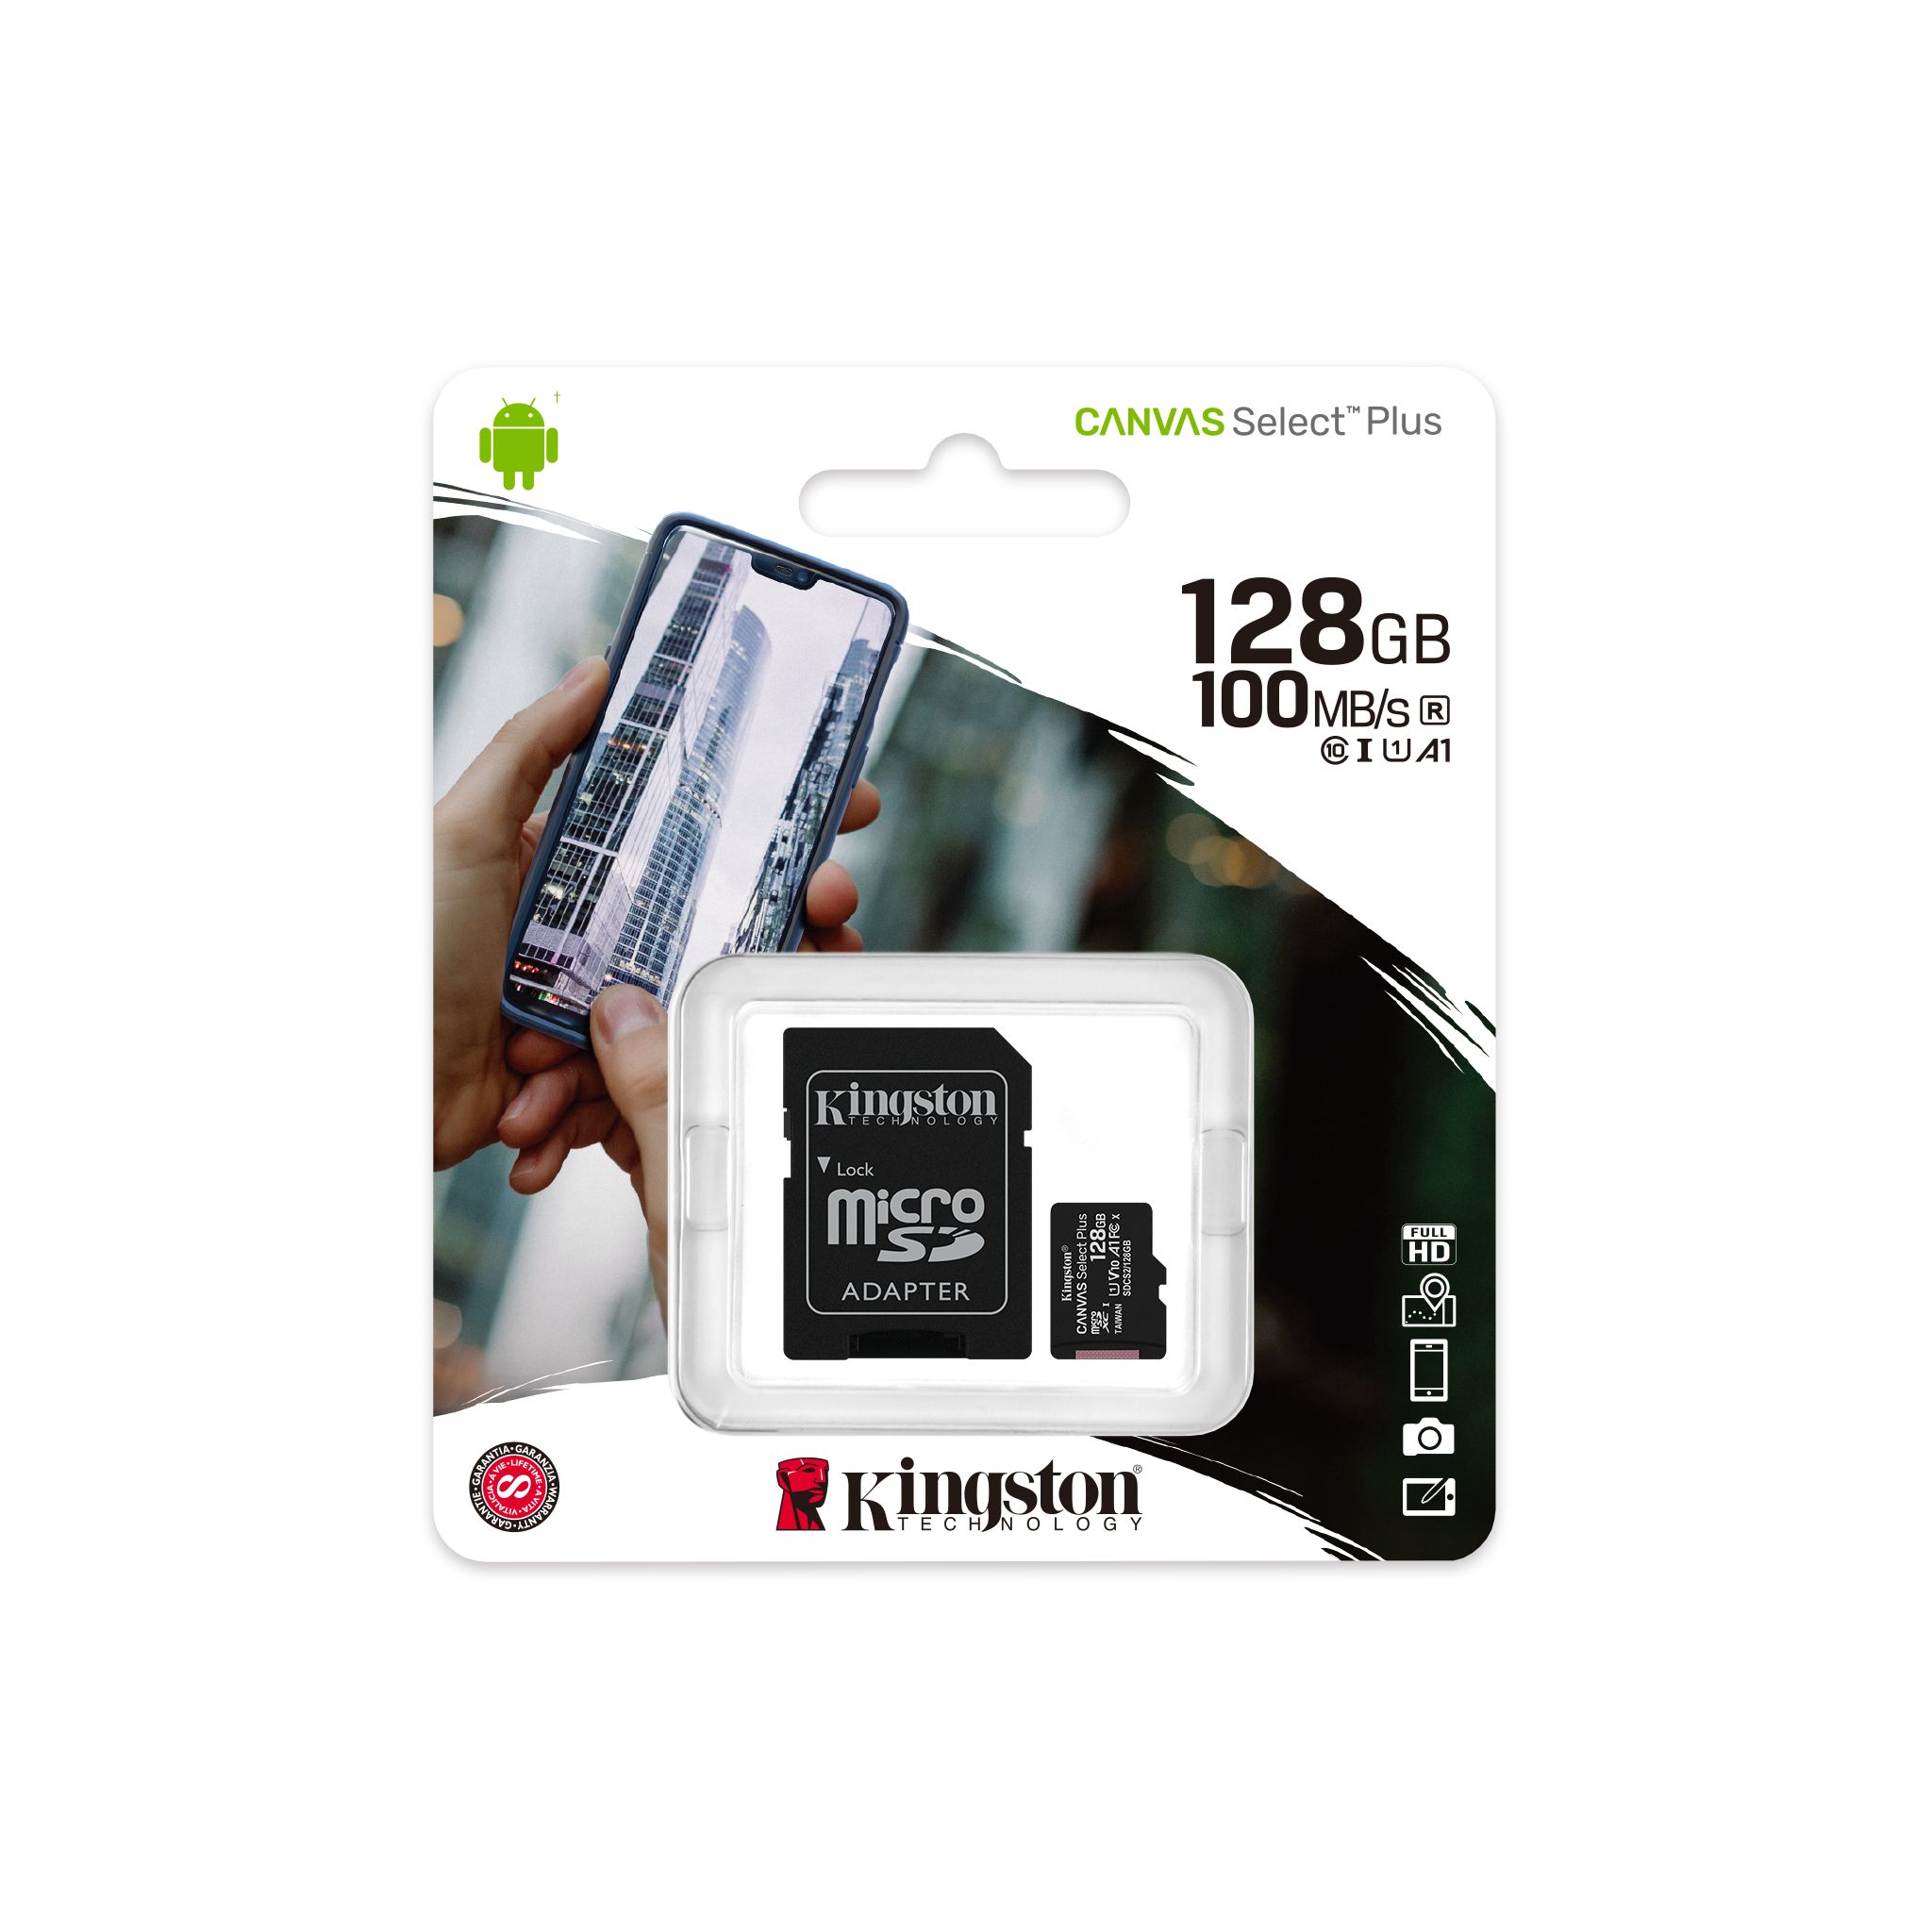 Kingston 100MB/s Flash Memory Card with Adapter (128GB Class 10)